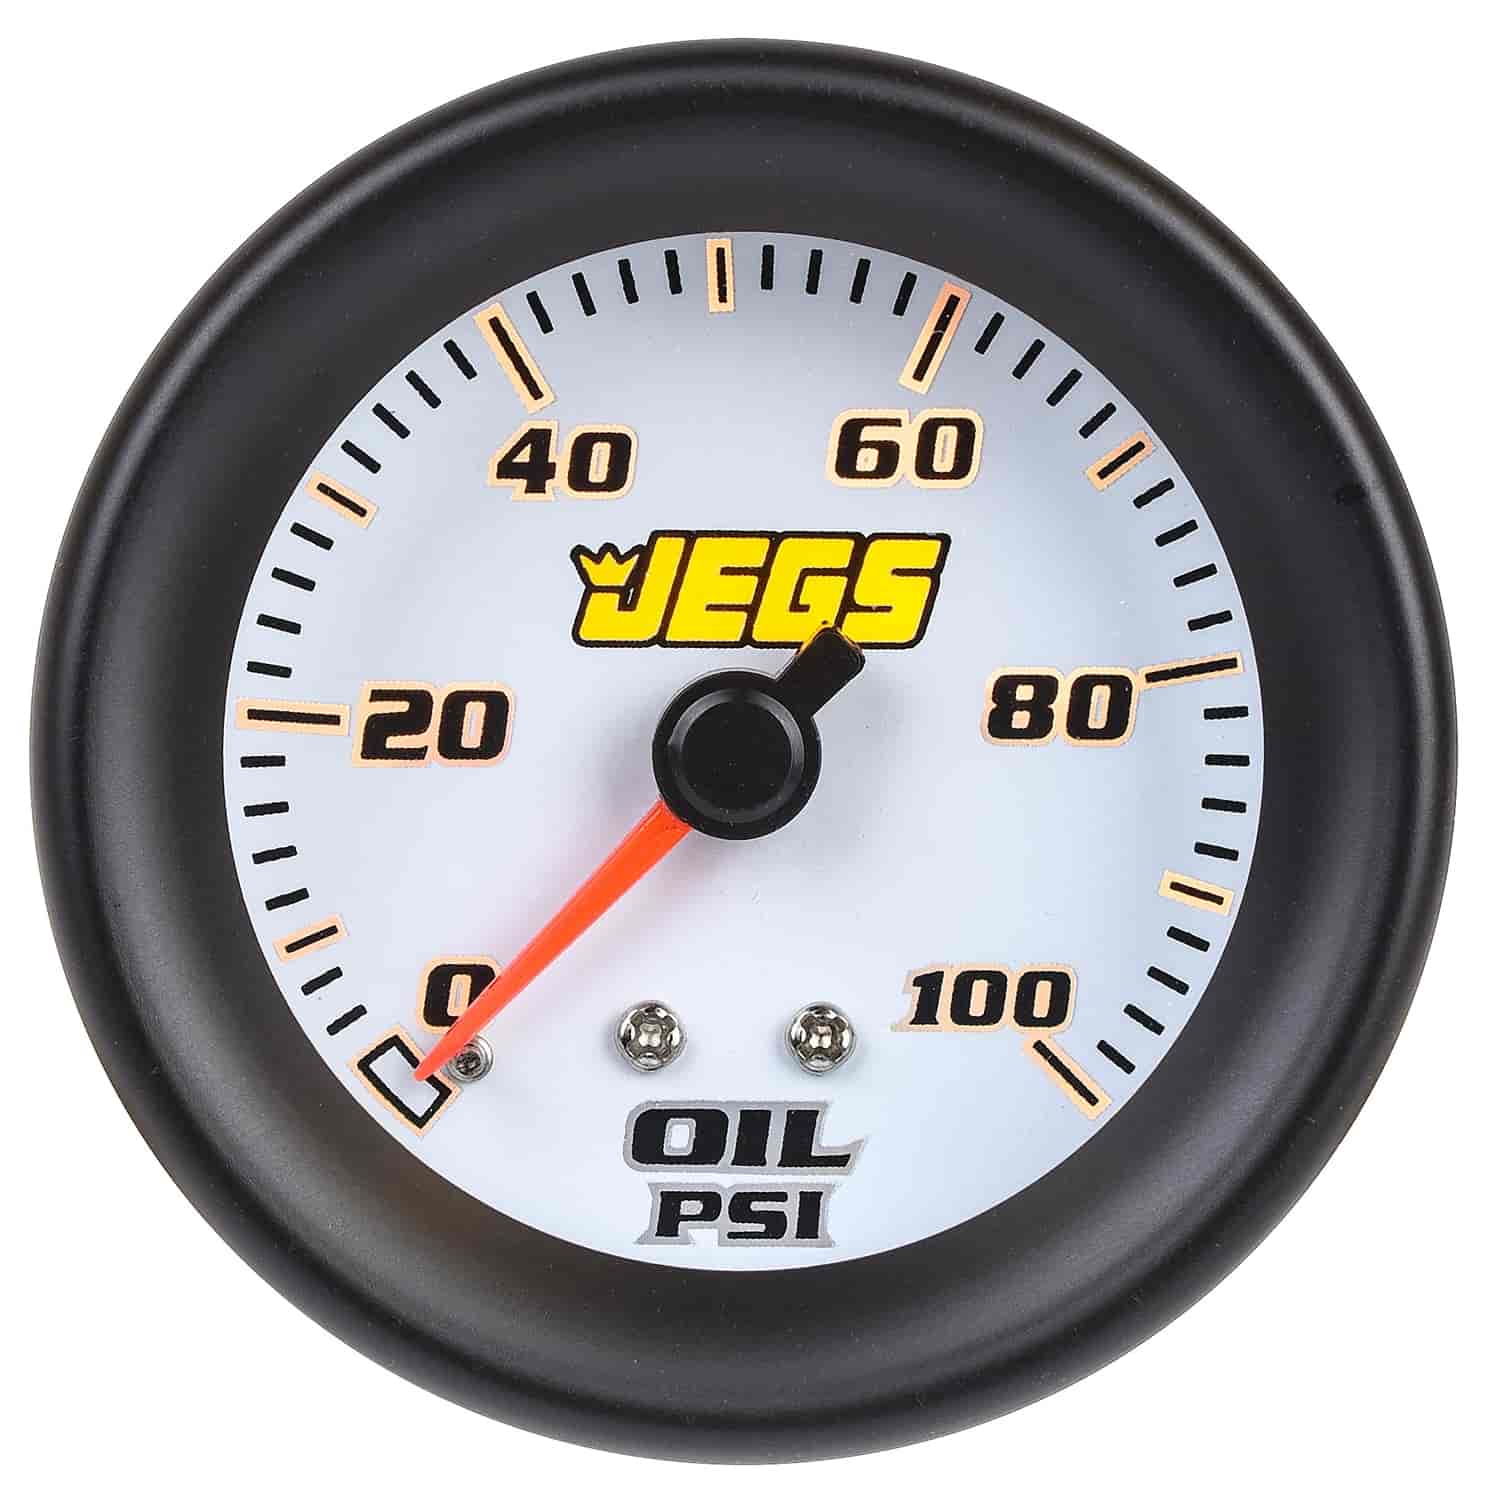 Oil Pressure Gauge [2 1/16 in. Mechanical, 0-100PSI with White Face]